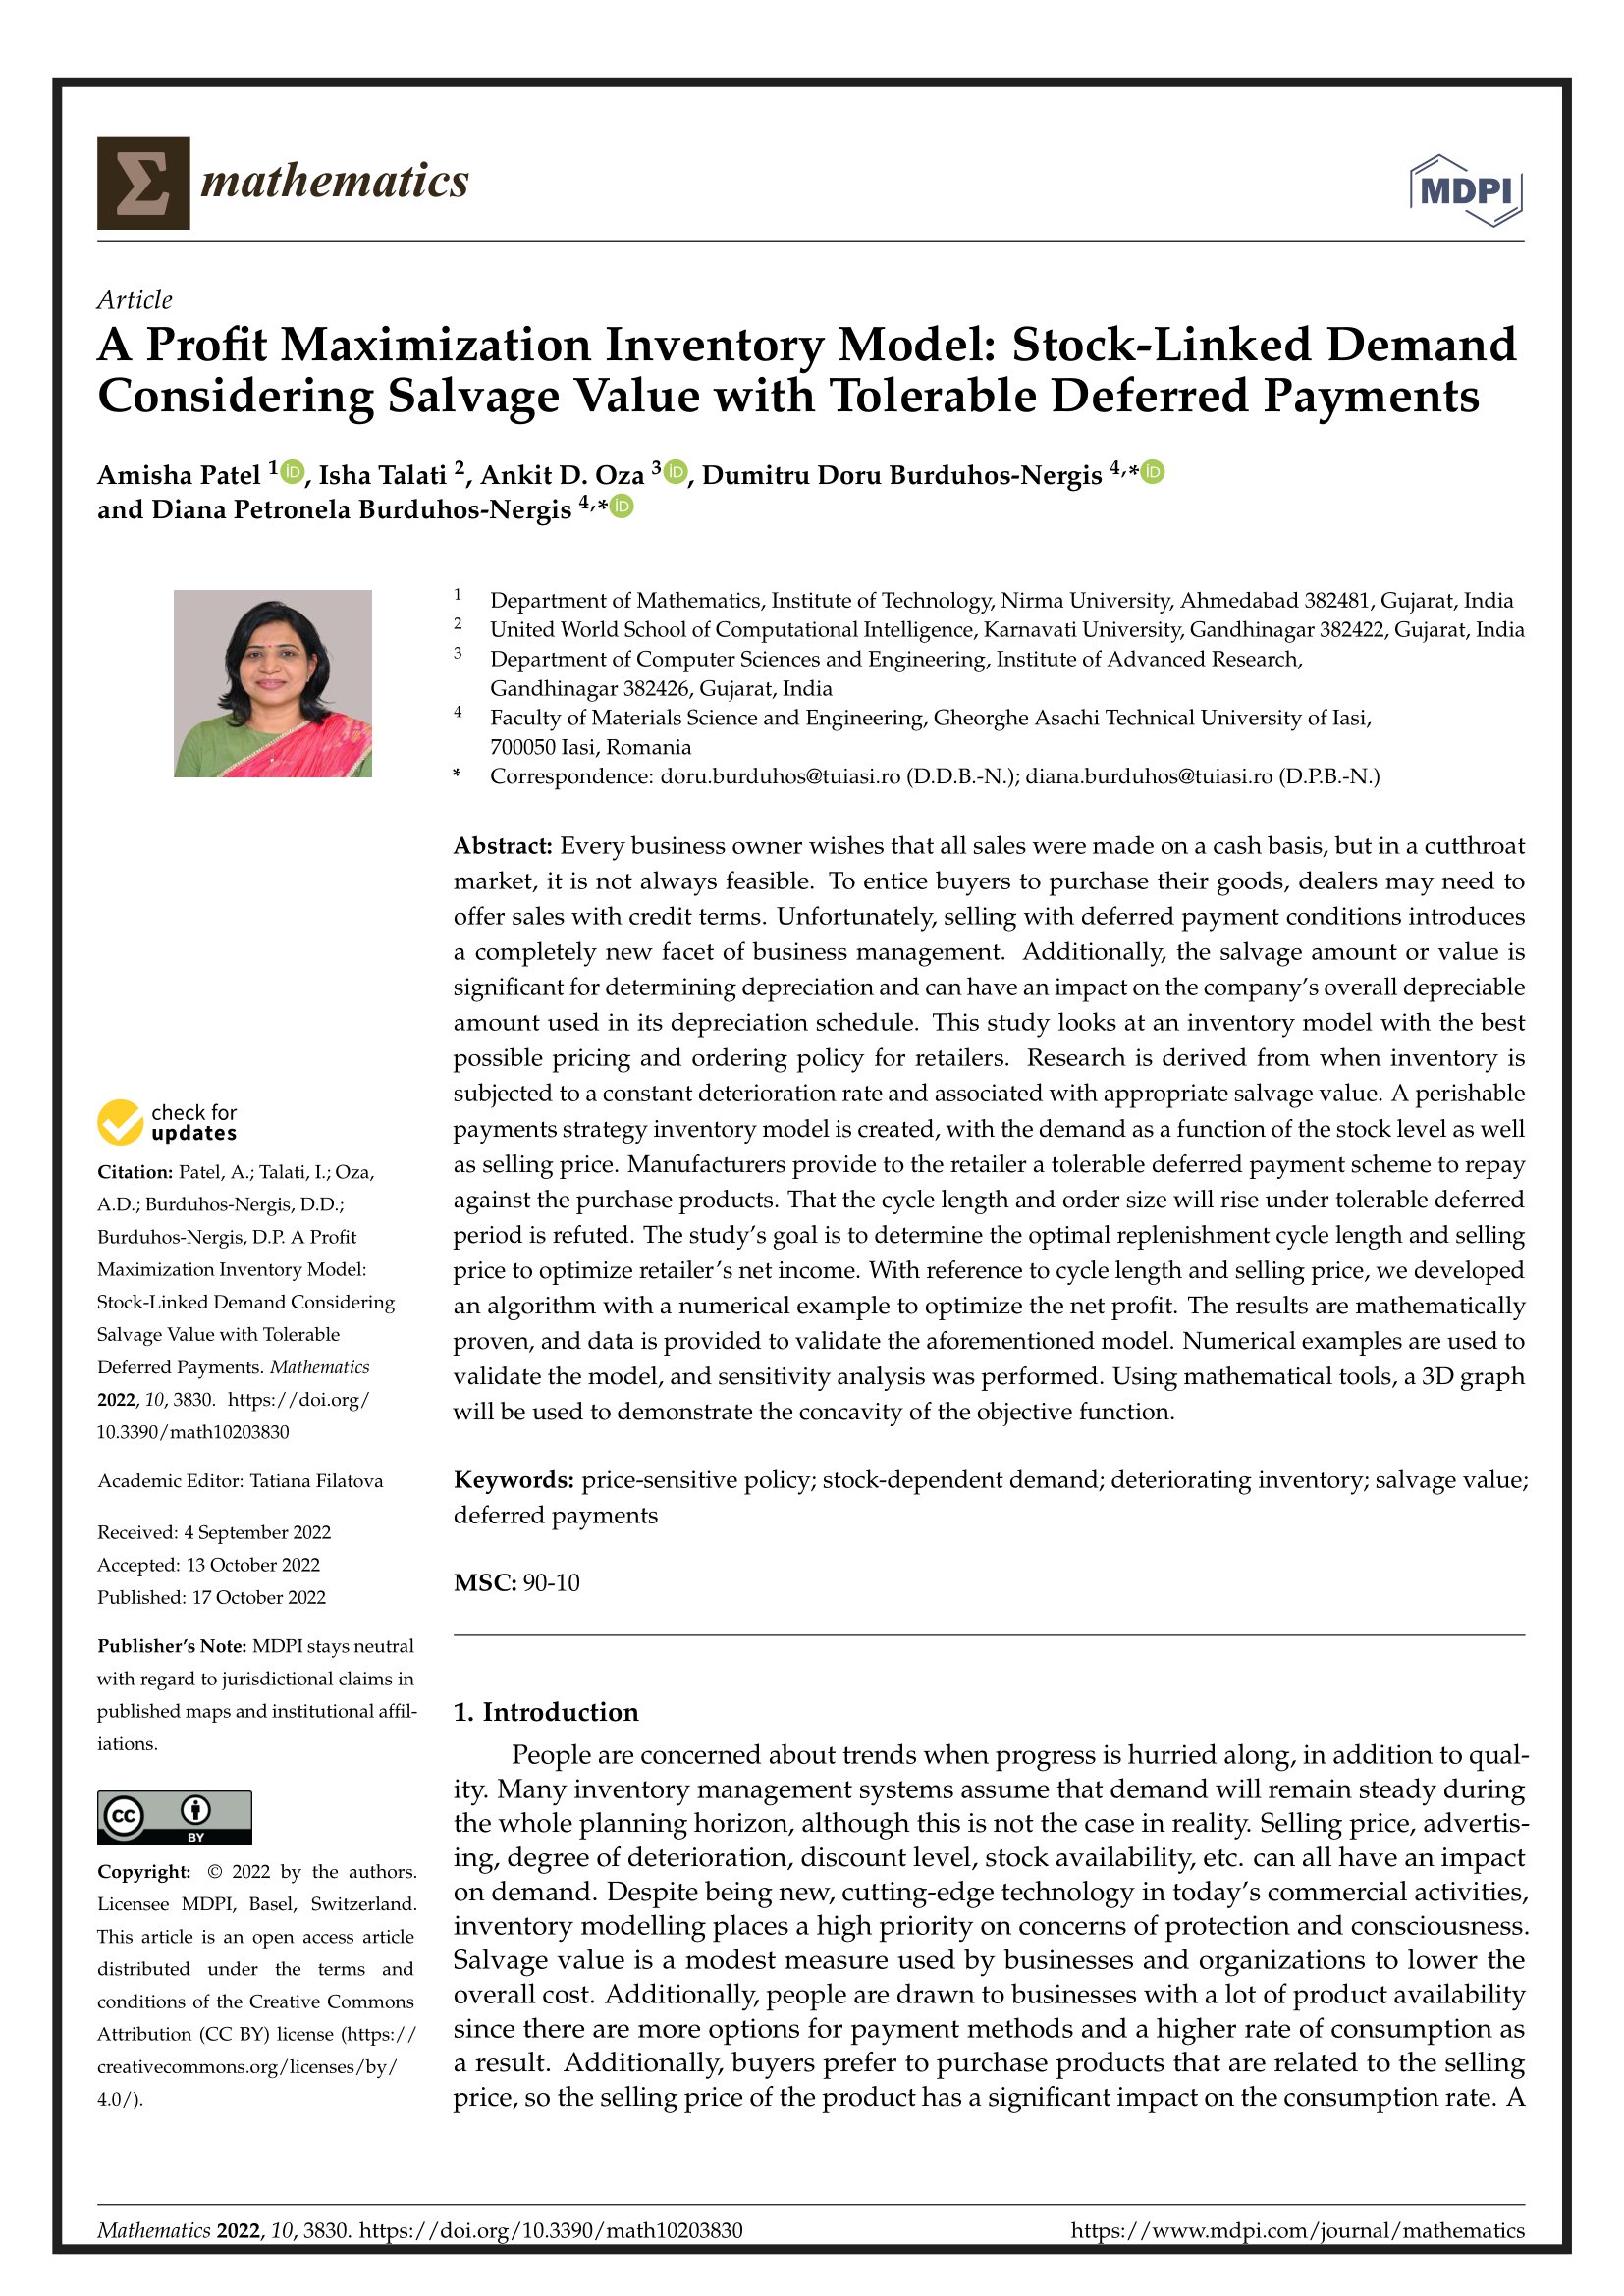 A profit maximization inventory model: stock-linked demand considering salvage value with tolerable deferred payments